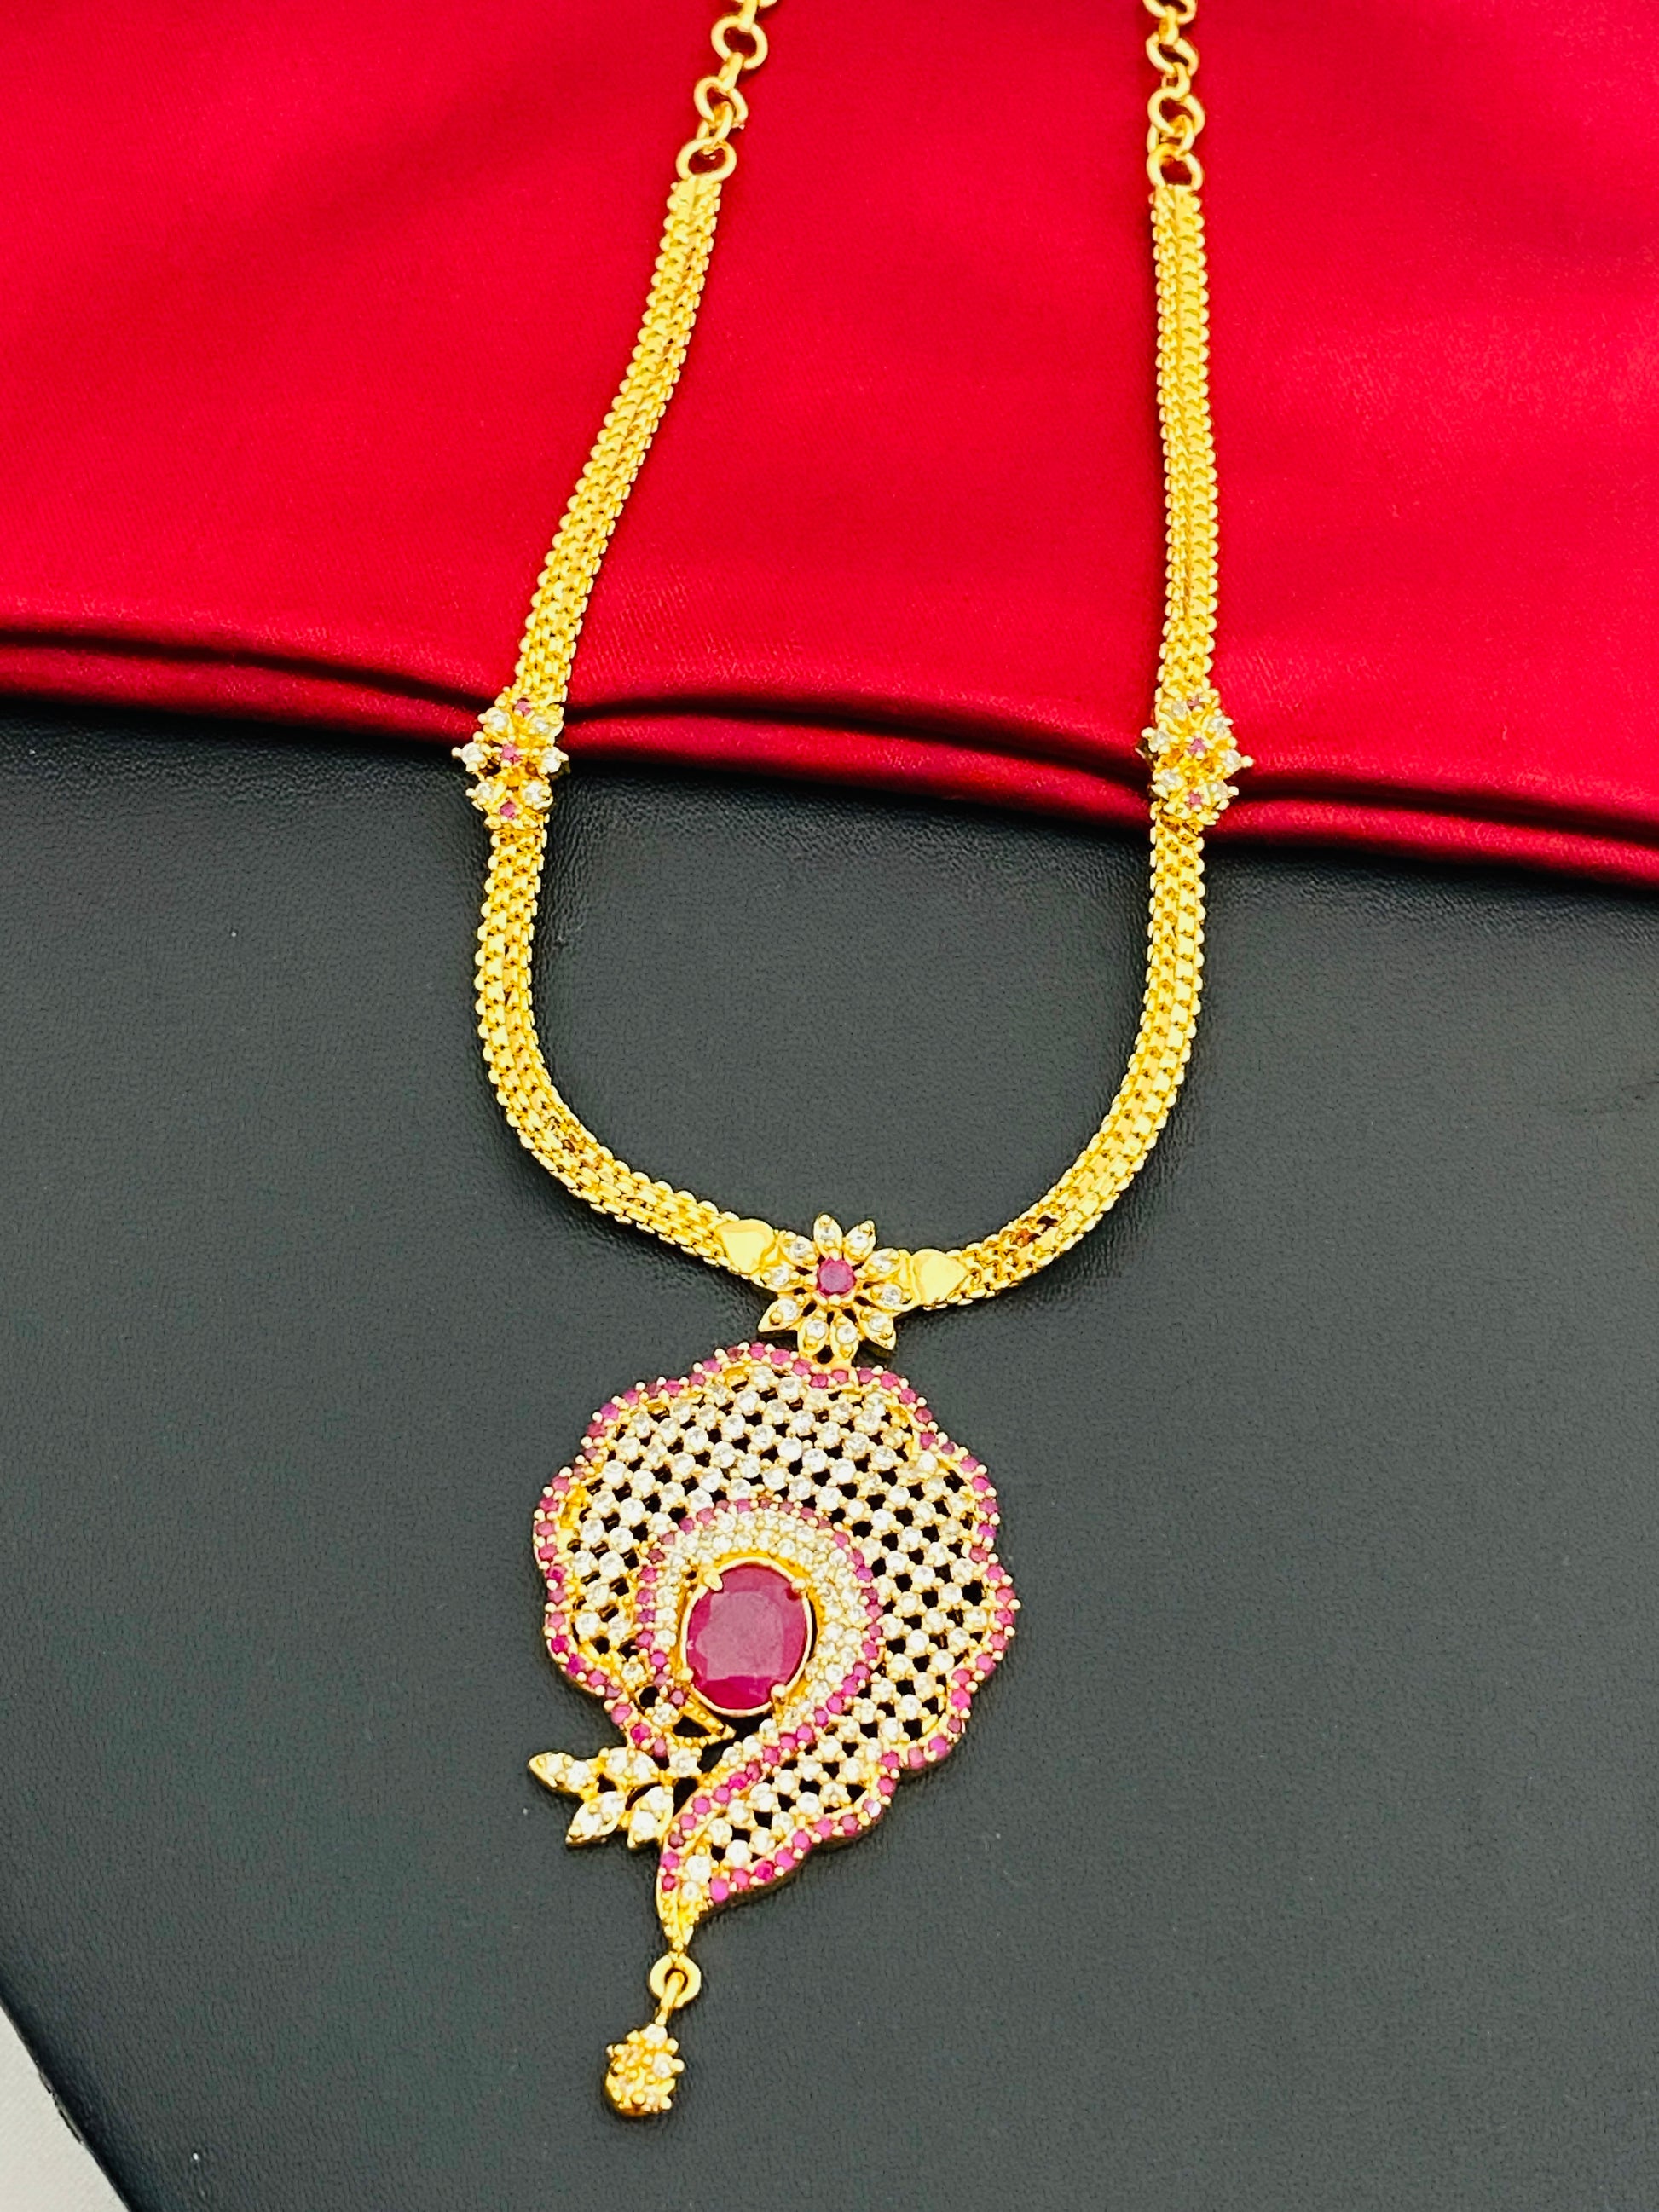 Delightful and simplistic, this beautiful necklace Near Me